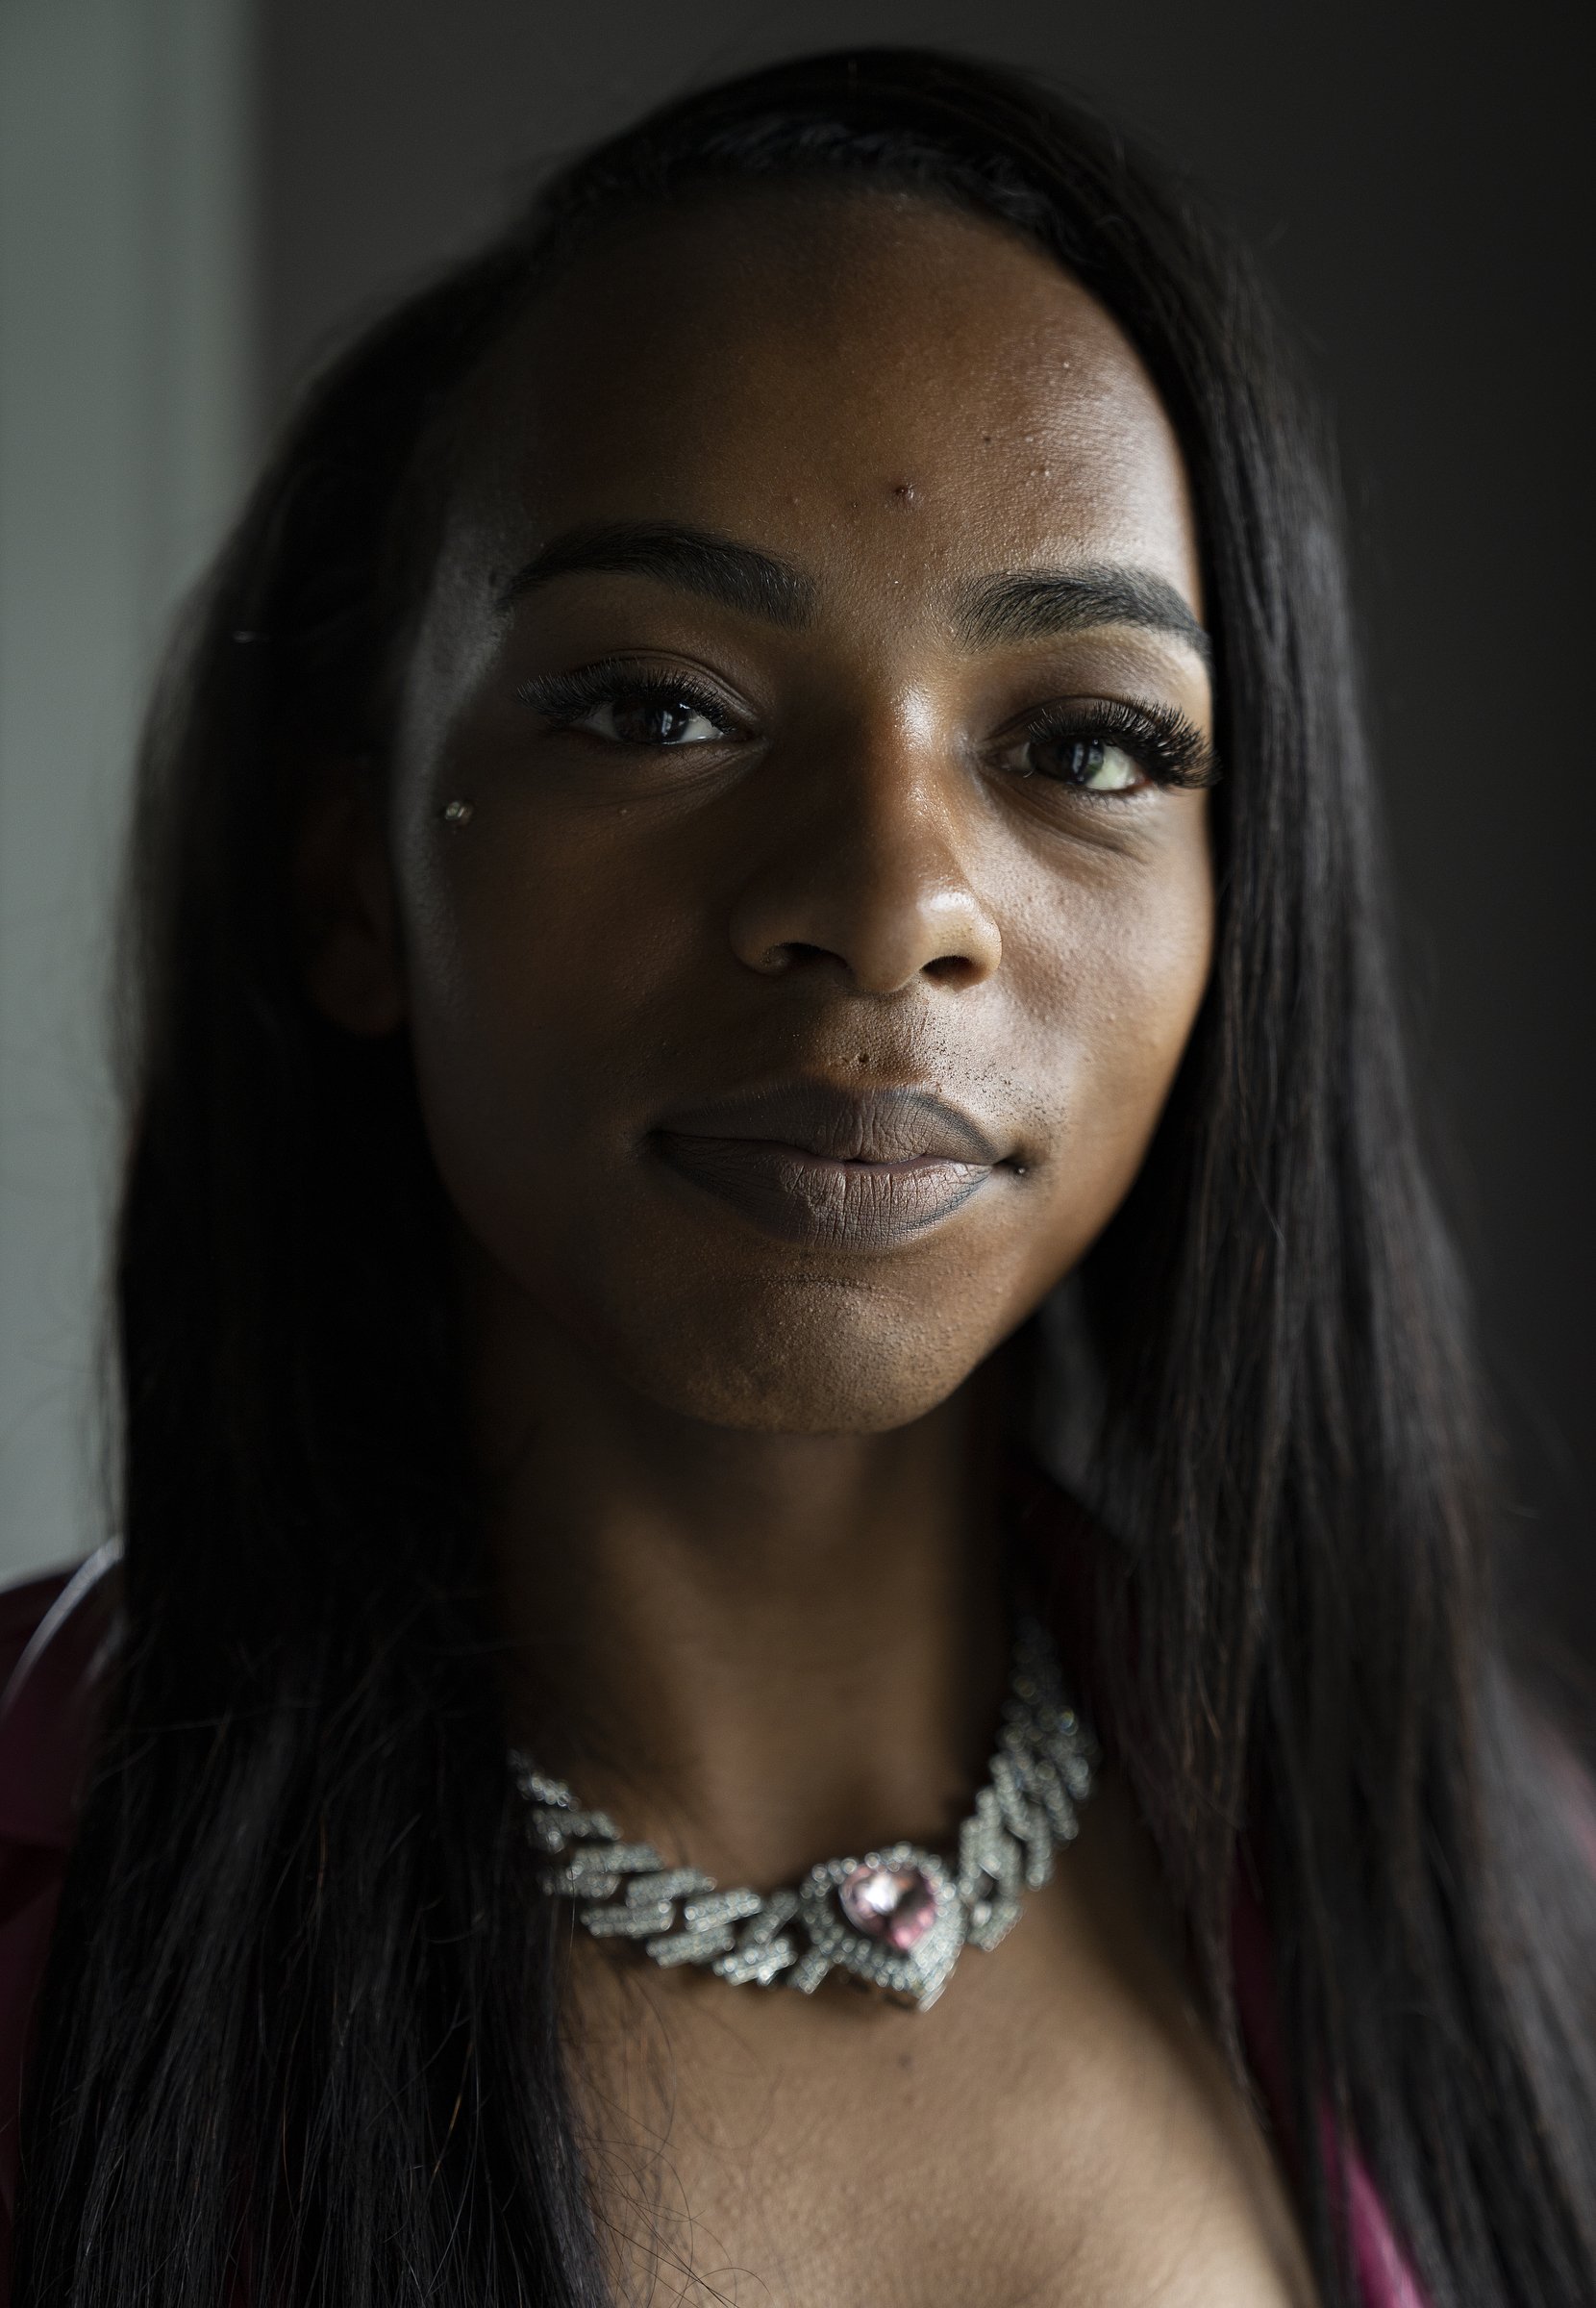  Ty'la Dior Sanders, 23, is a lifelong Hoosier who attended Warren Central and grew up on the east side of Indianapolis. Sanders' gender expression was fluid throughout her teen years, before she found the words in young adulthood to identify as a tr